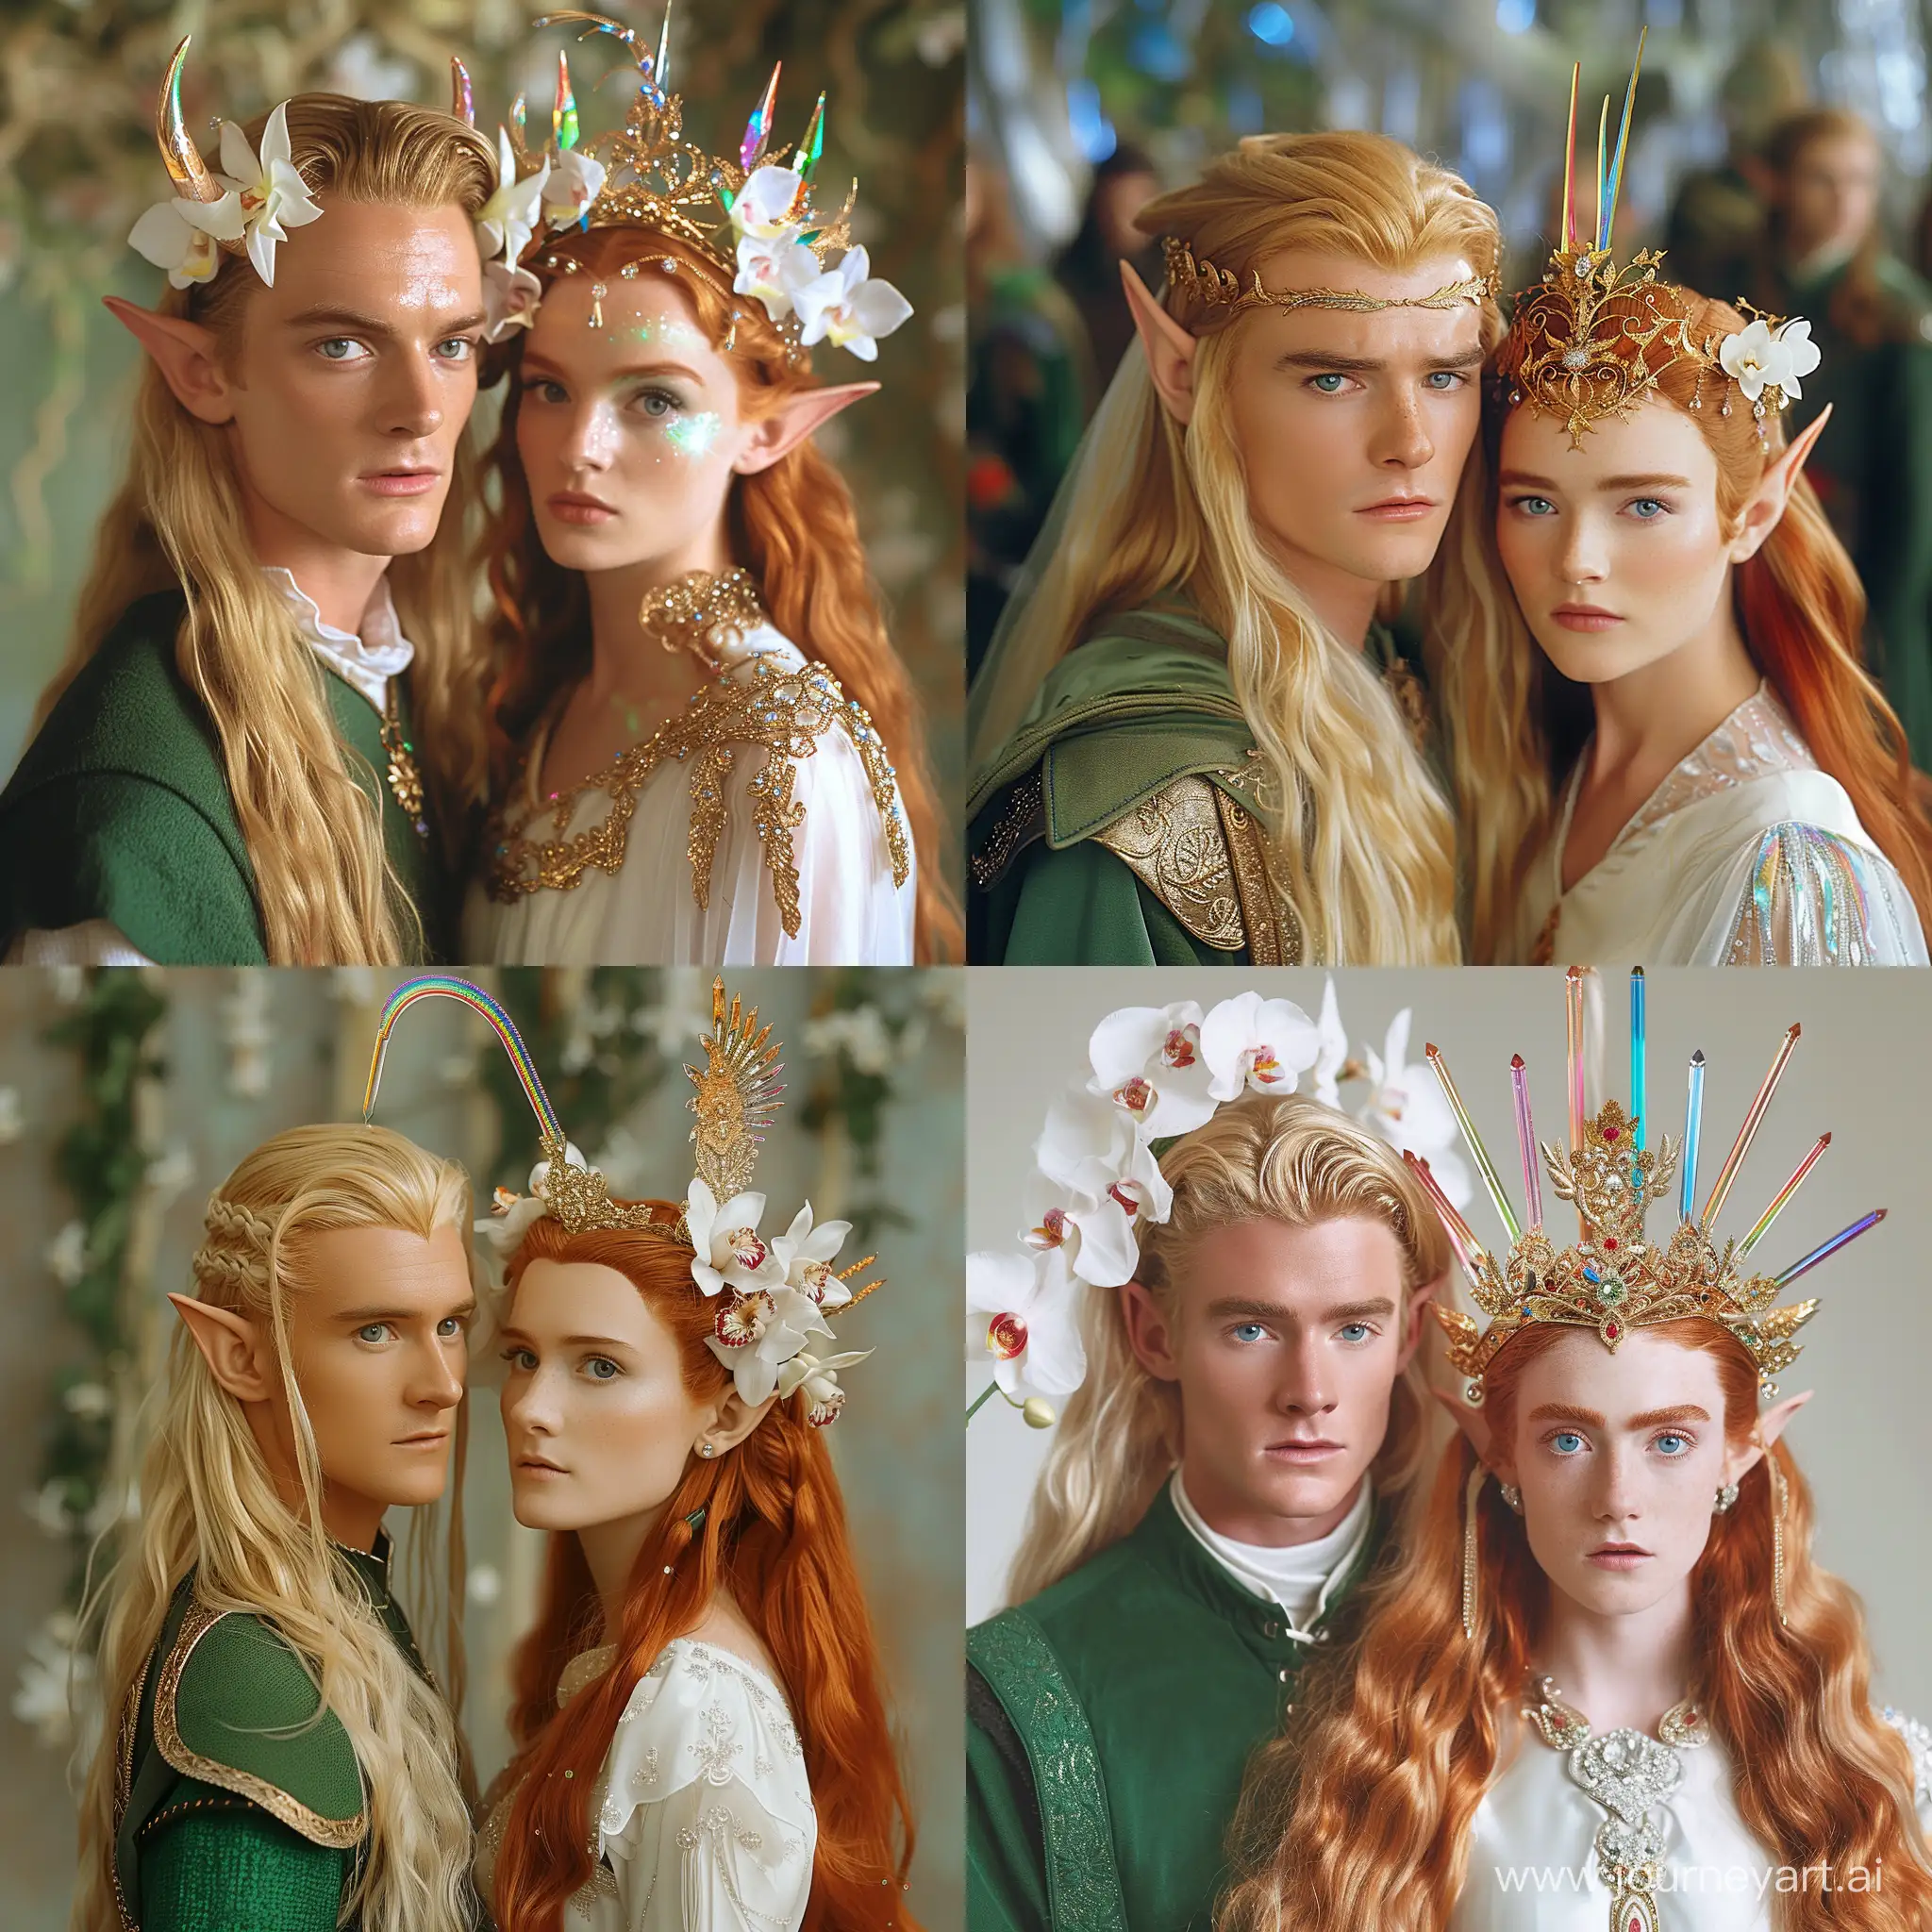 The wedding of Prince Legolas look like Orlando bloom in the lord of the rings, with blond long hair and dressed in a green similar tunic and a red-haired blue-eyed princess of the elven forest palace. The princess is wearing a white dress decorated with orchid flowers. The princess wears a golden tiara with elongated rainbow crystals on her head